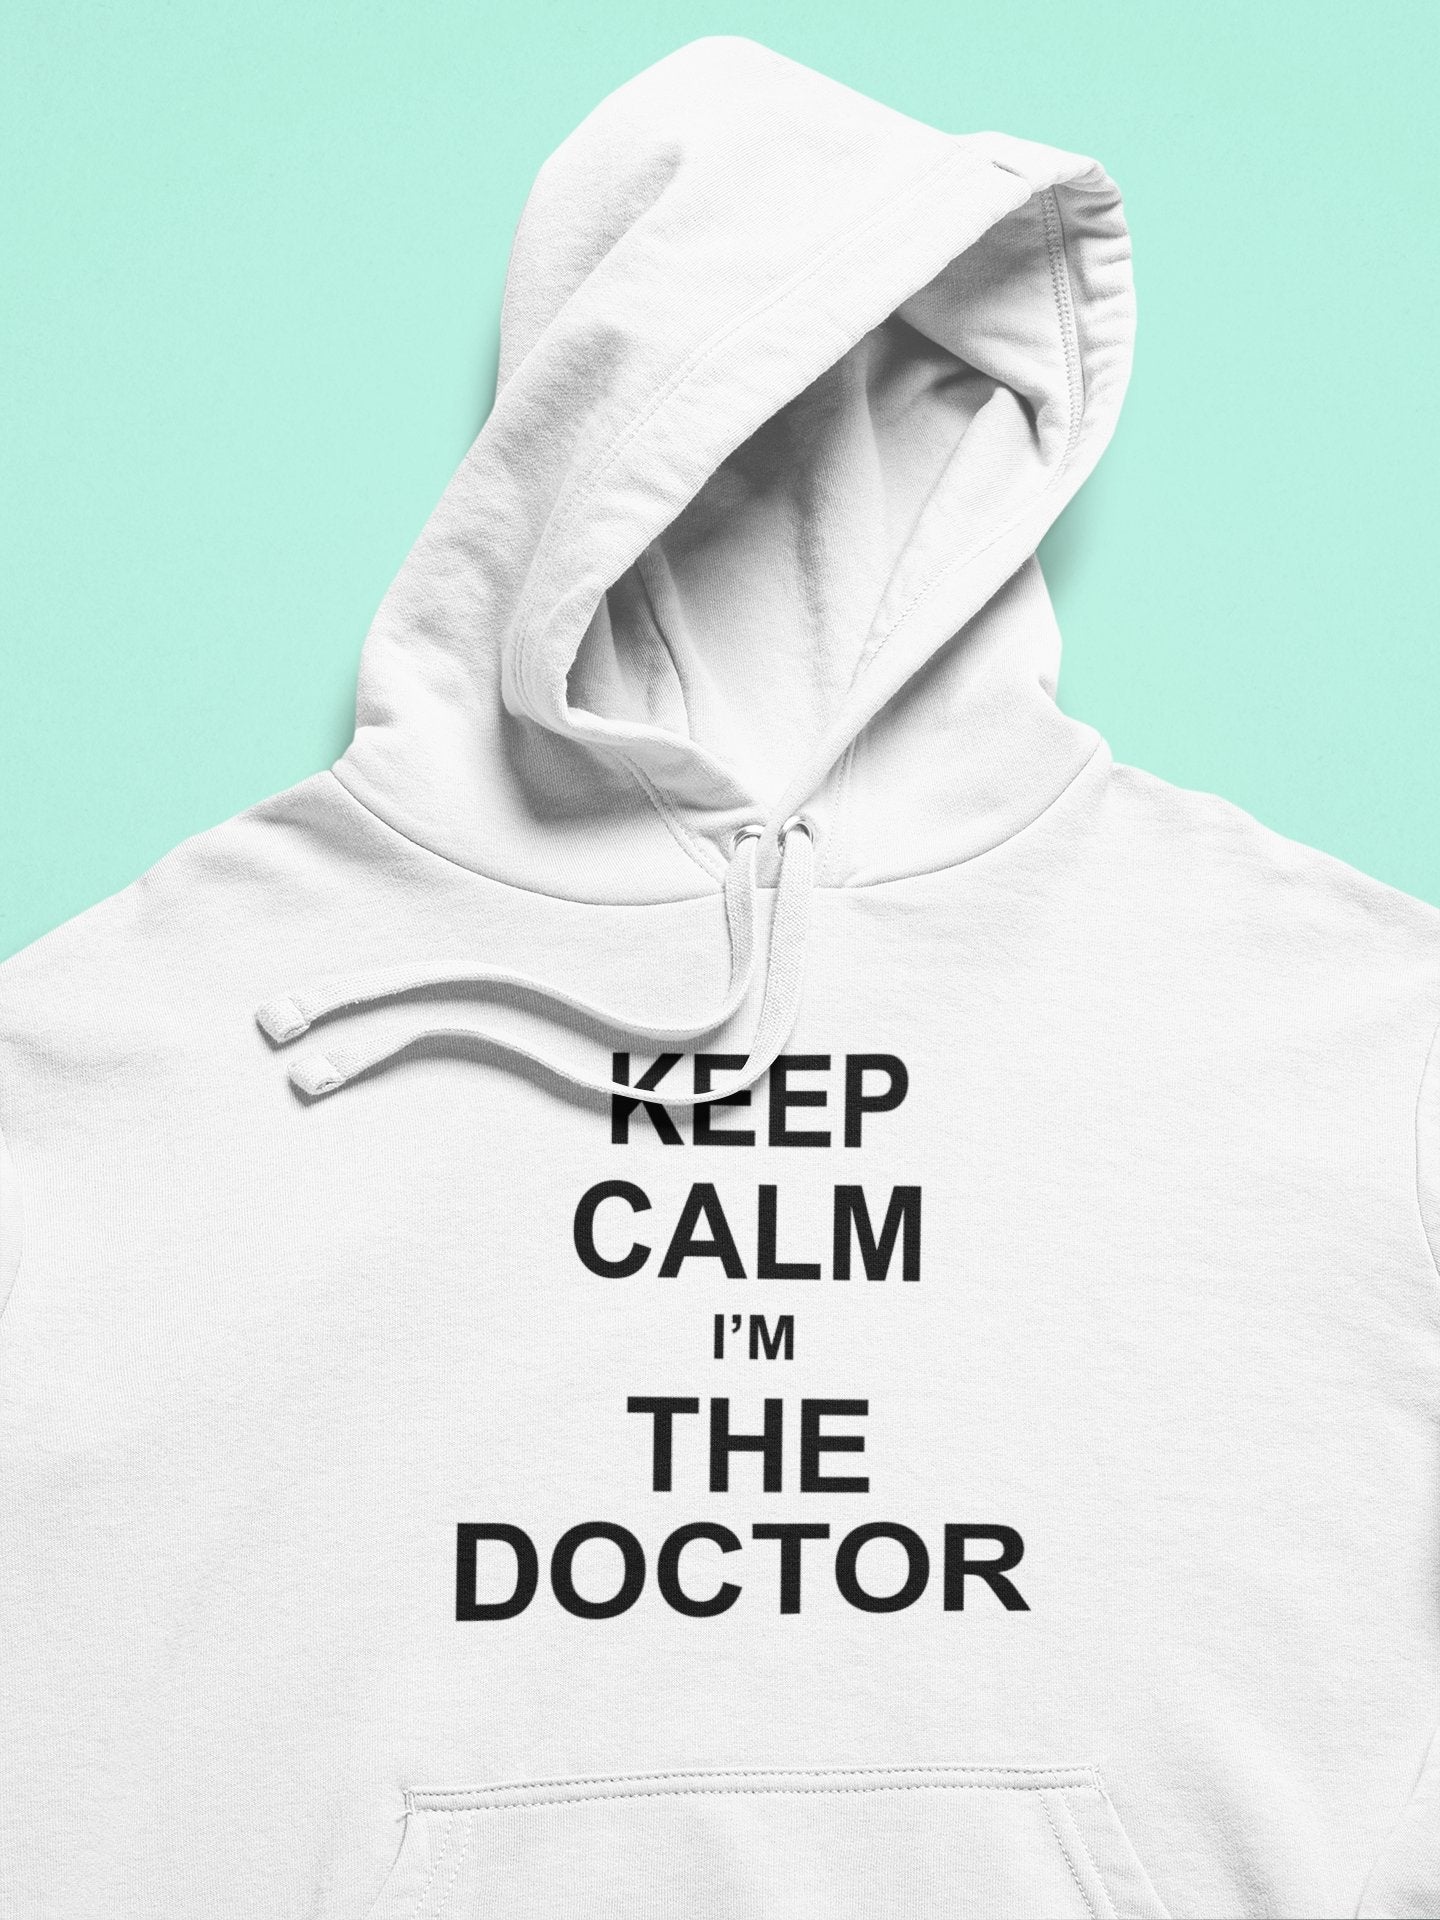 Keep Calm I Am A Doctor Hoodies for Women-FunkyTradition - Funky Tees Club